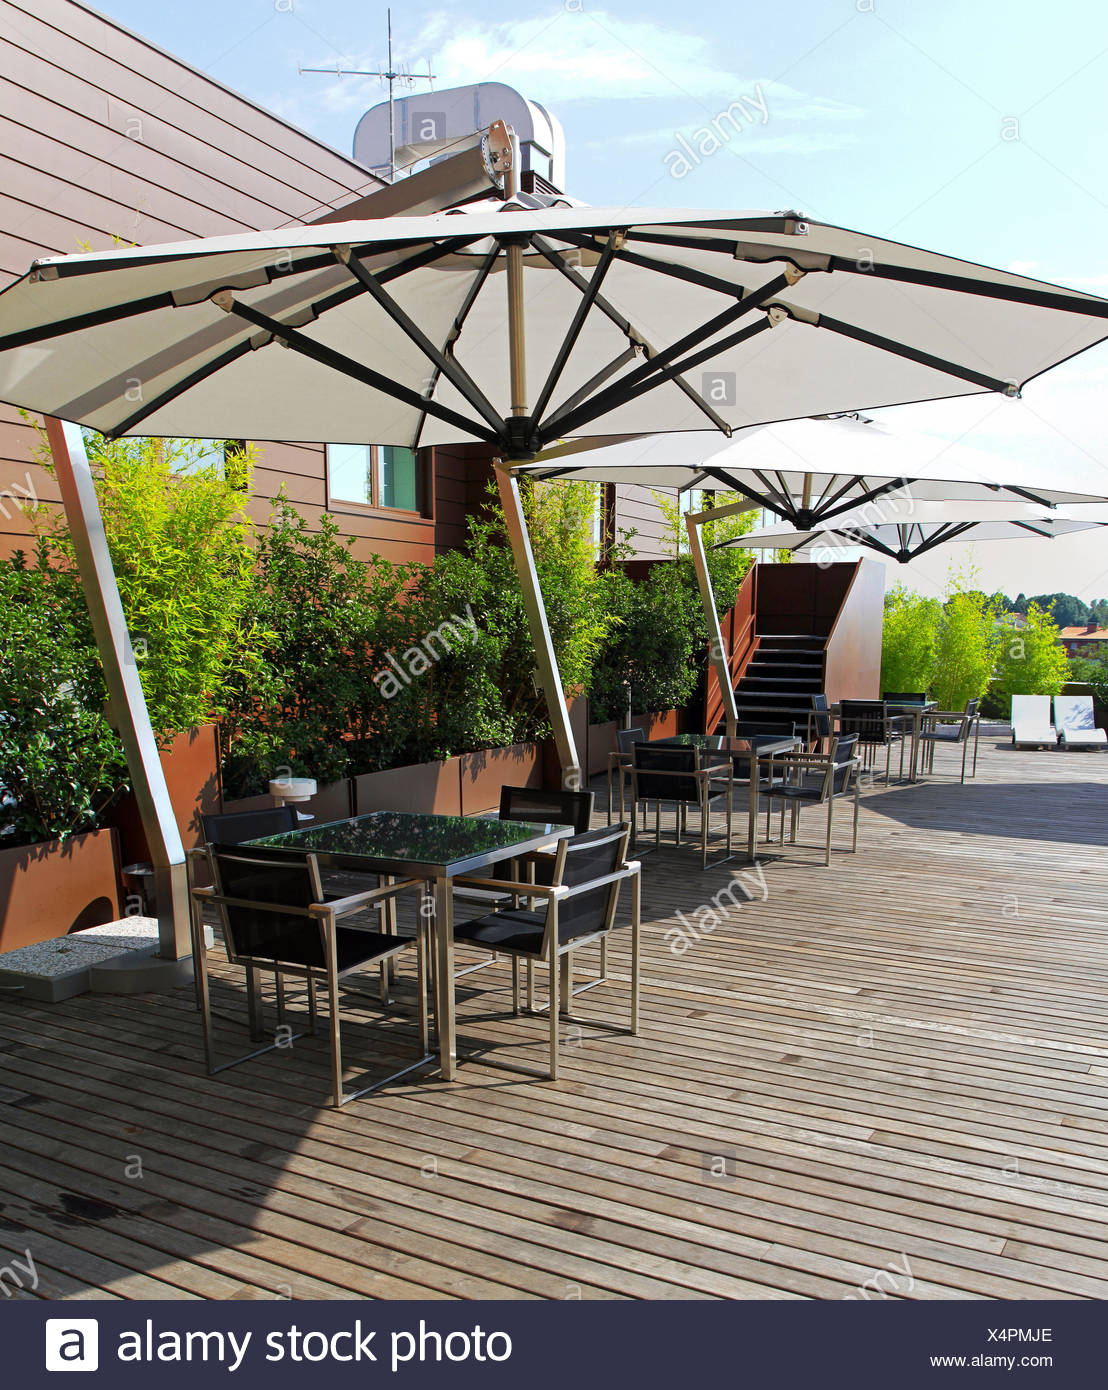 Rooftop Terrace With Small Green Garden Oasis Stock Photo